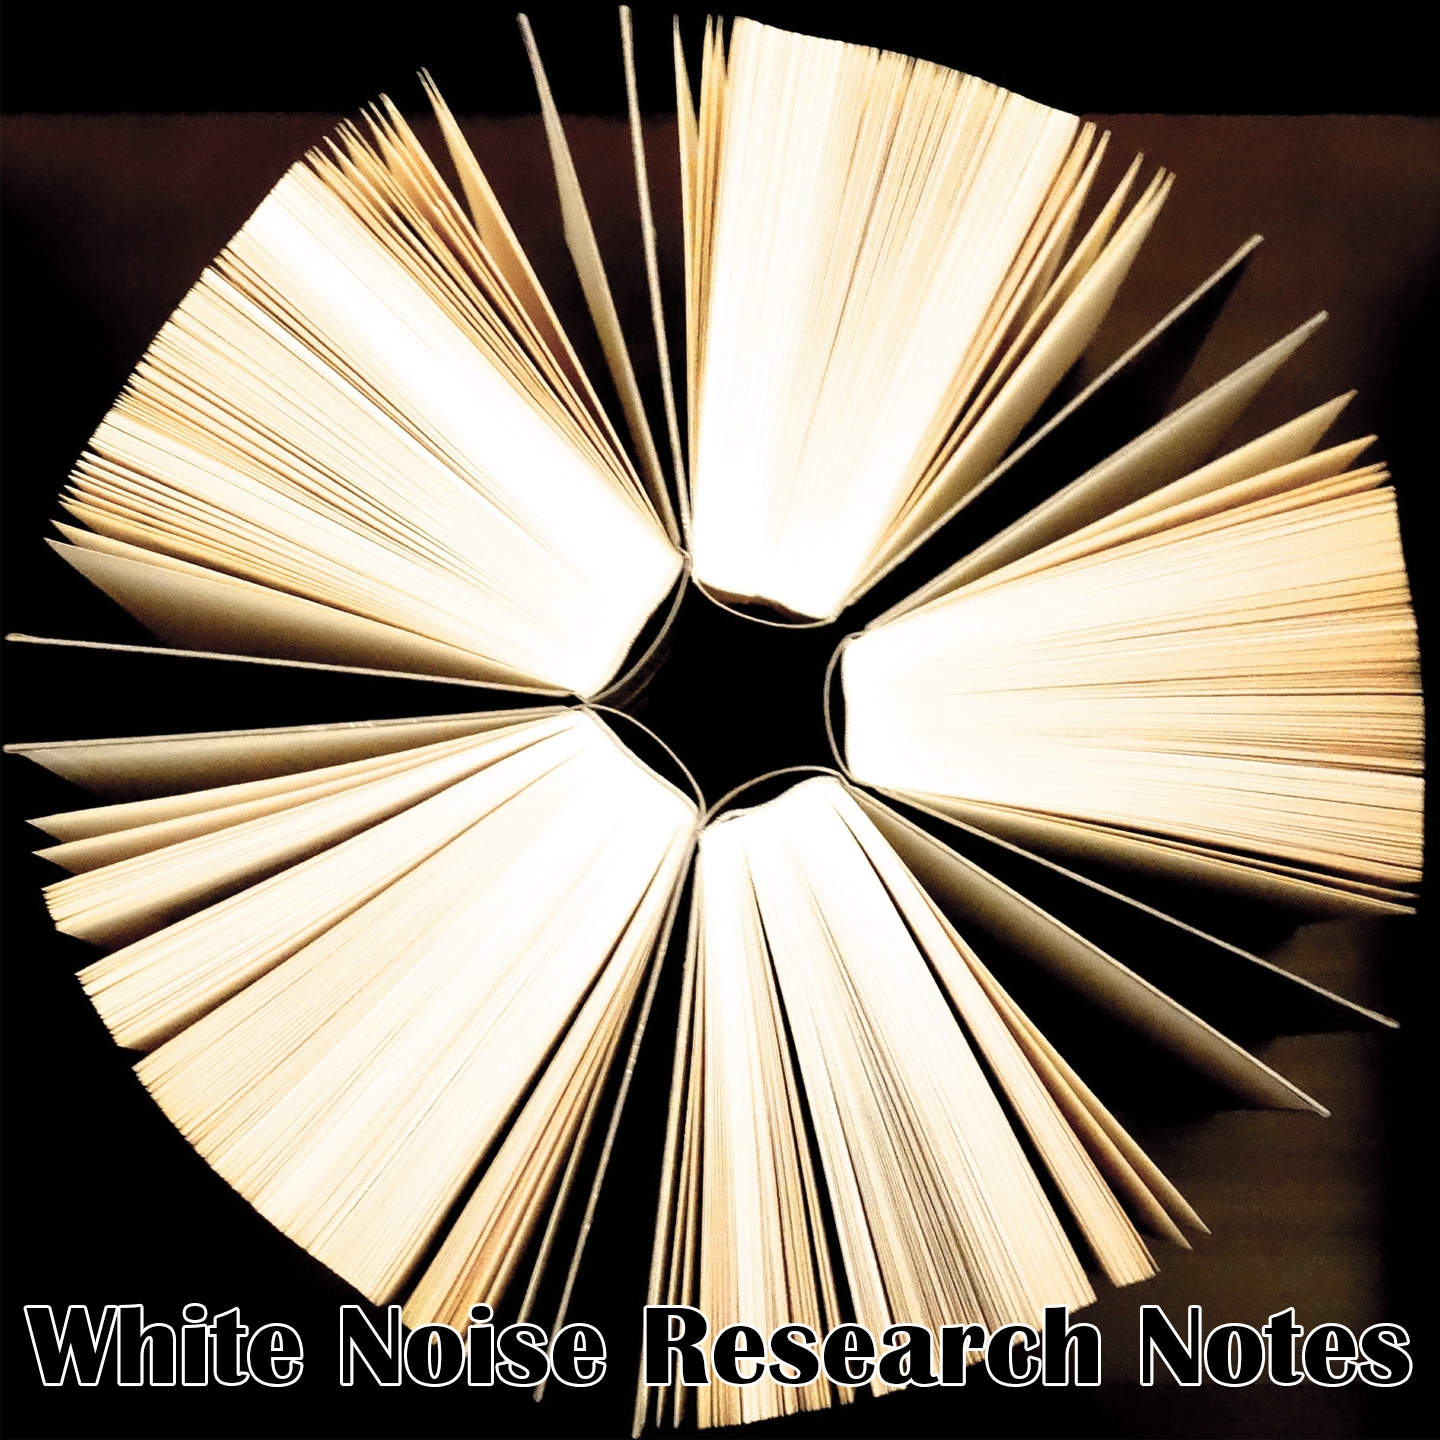 White Noise Research Notes